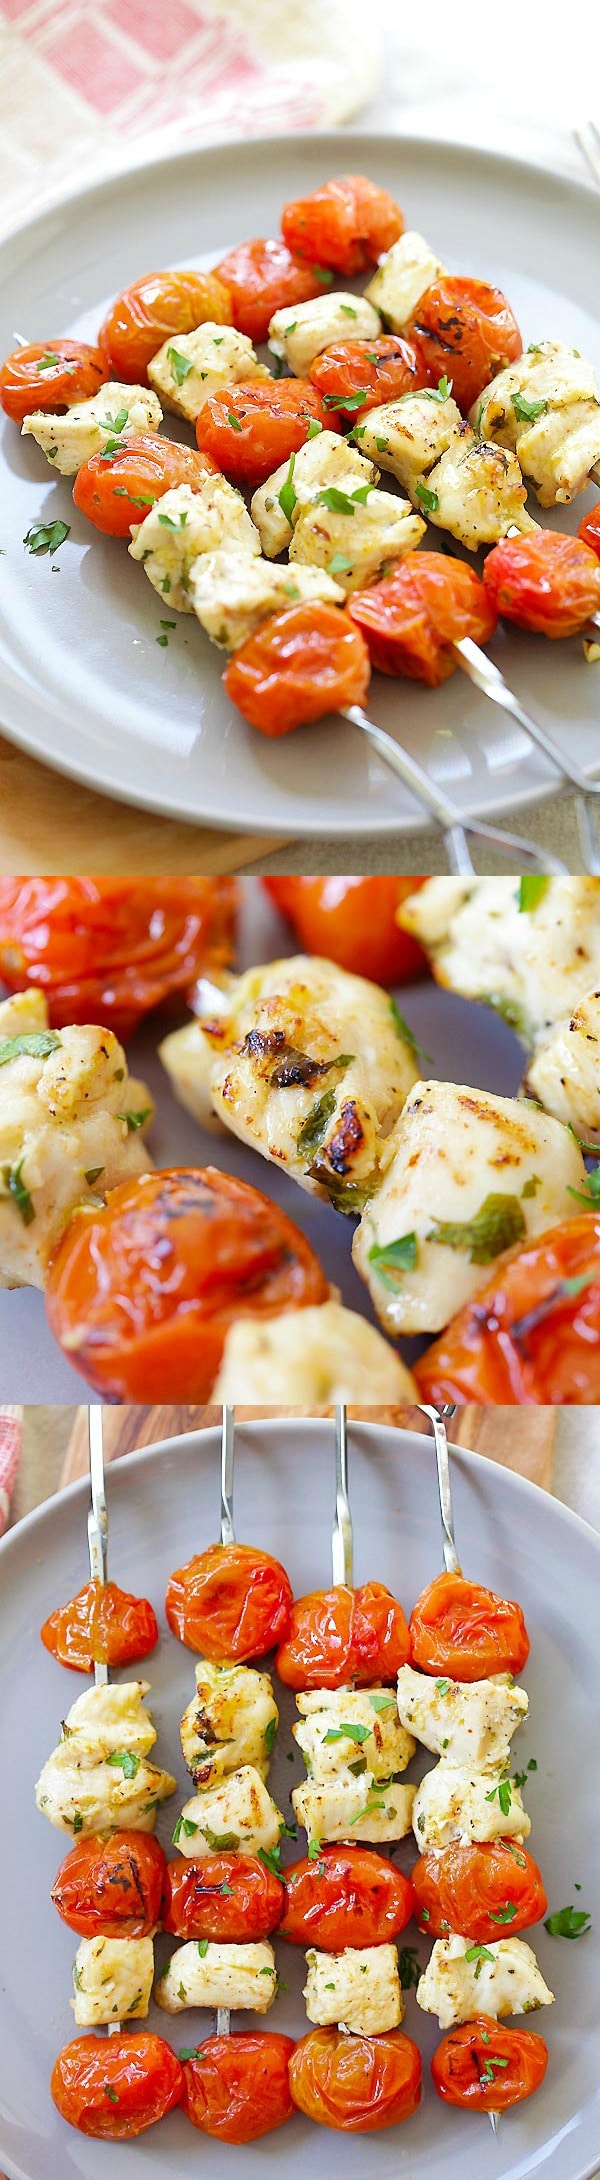 The juiciest and best summery chicken kebab made with garlic, lime juice, olive oil and grape tomatoes. So good! | rasamalaysia.com